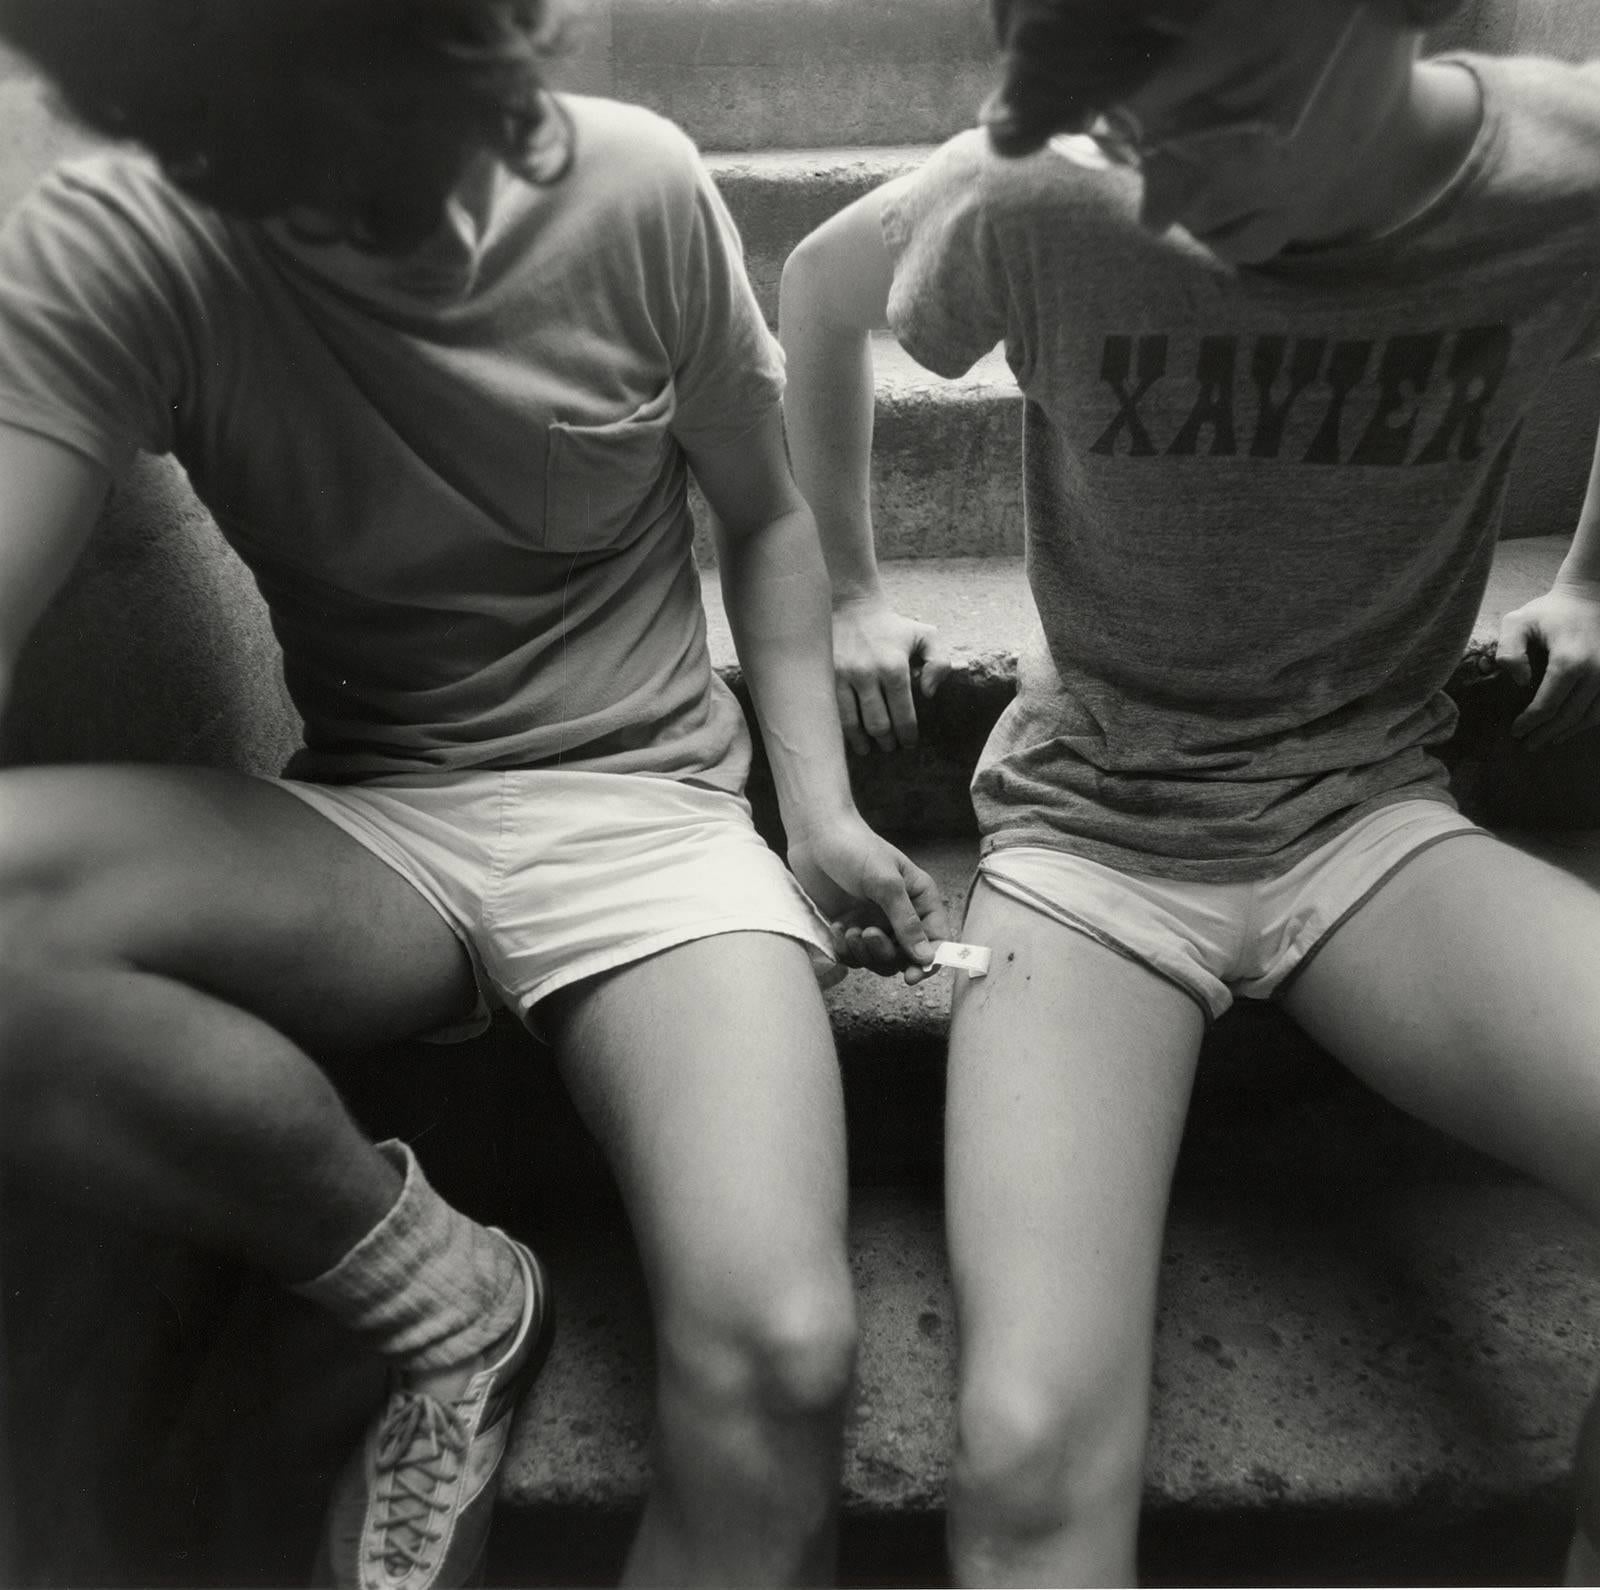 Arthur Tress Portrait Photograph - Teenage Runners (two innocent young boys in intimate moment on a New York stoop)